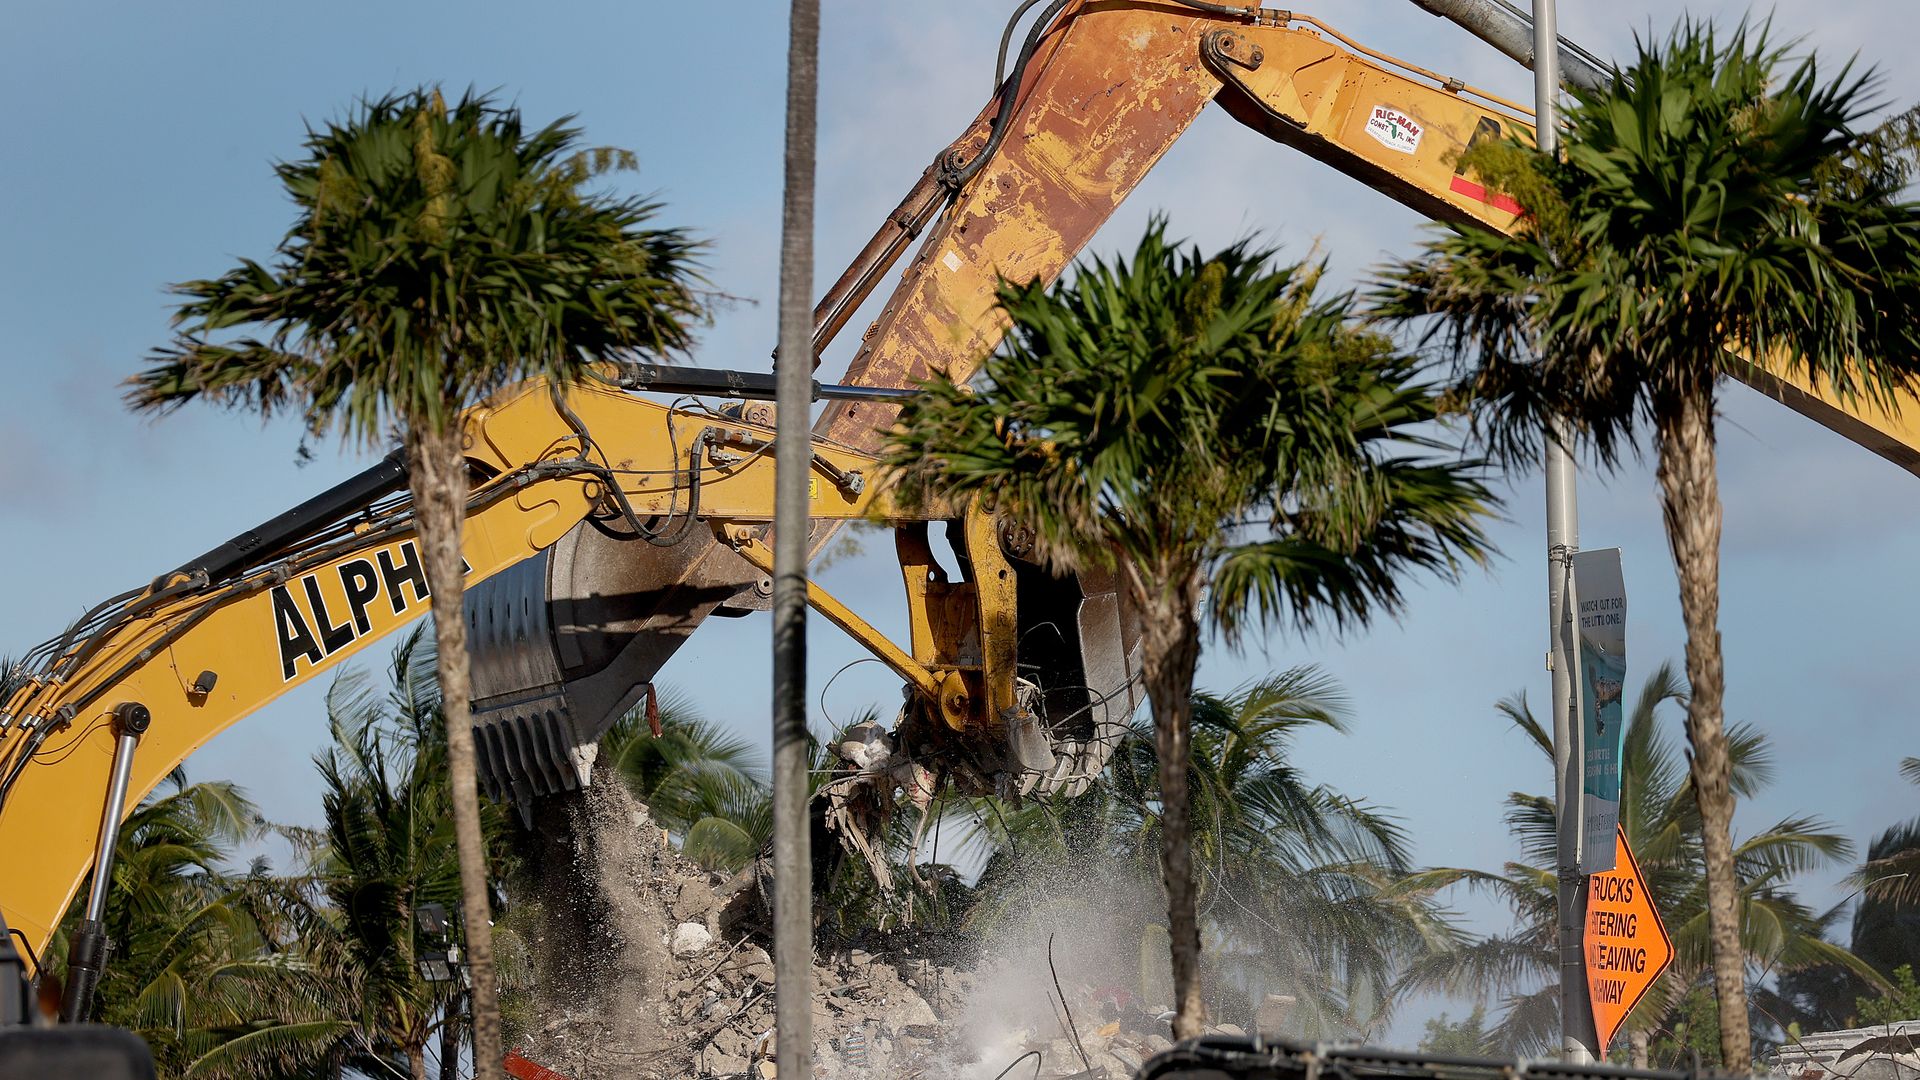 Excavating machinery continues to dig through the ruins of the partially collapsed 12-story Champlain Towers South condo building in Surfside, Florida.